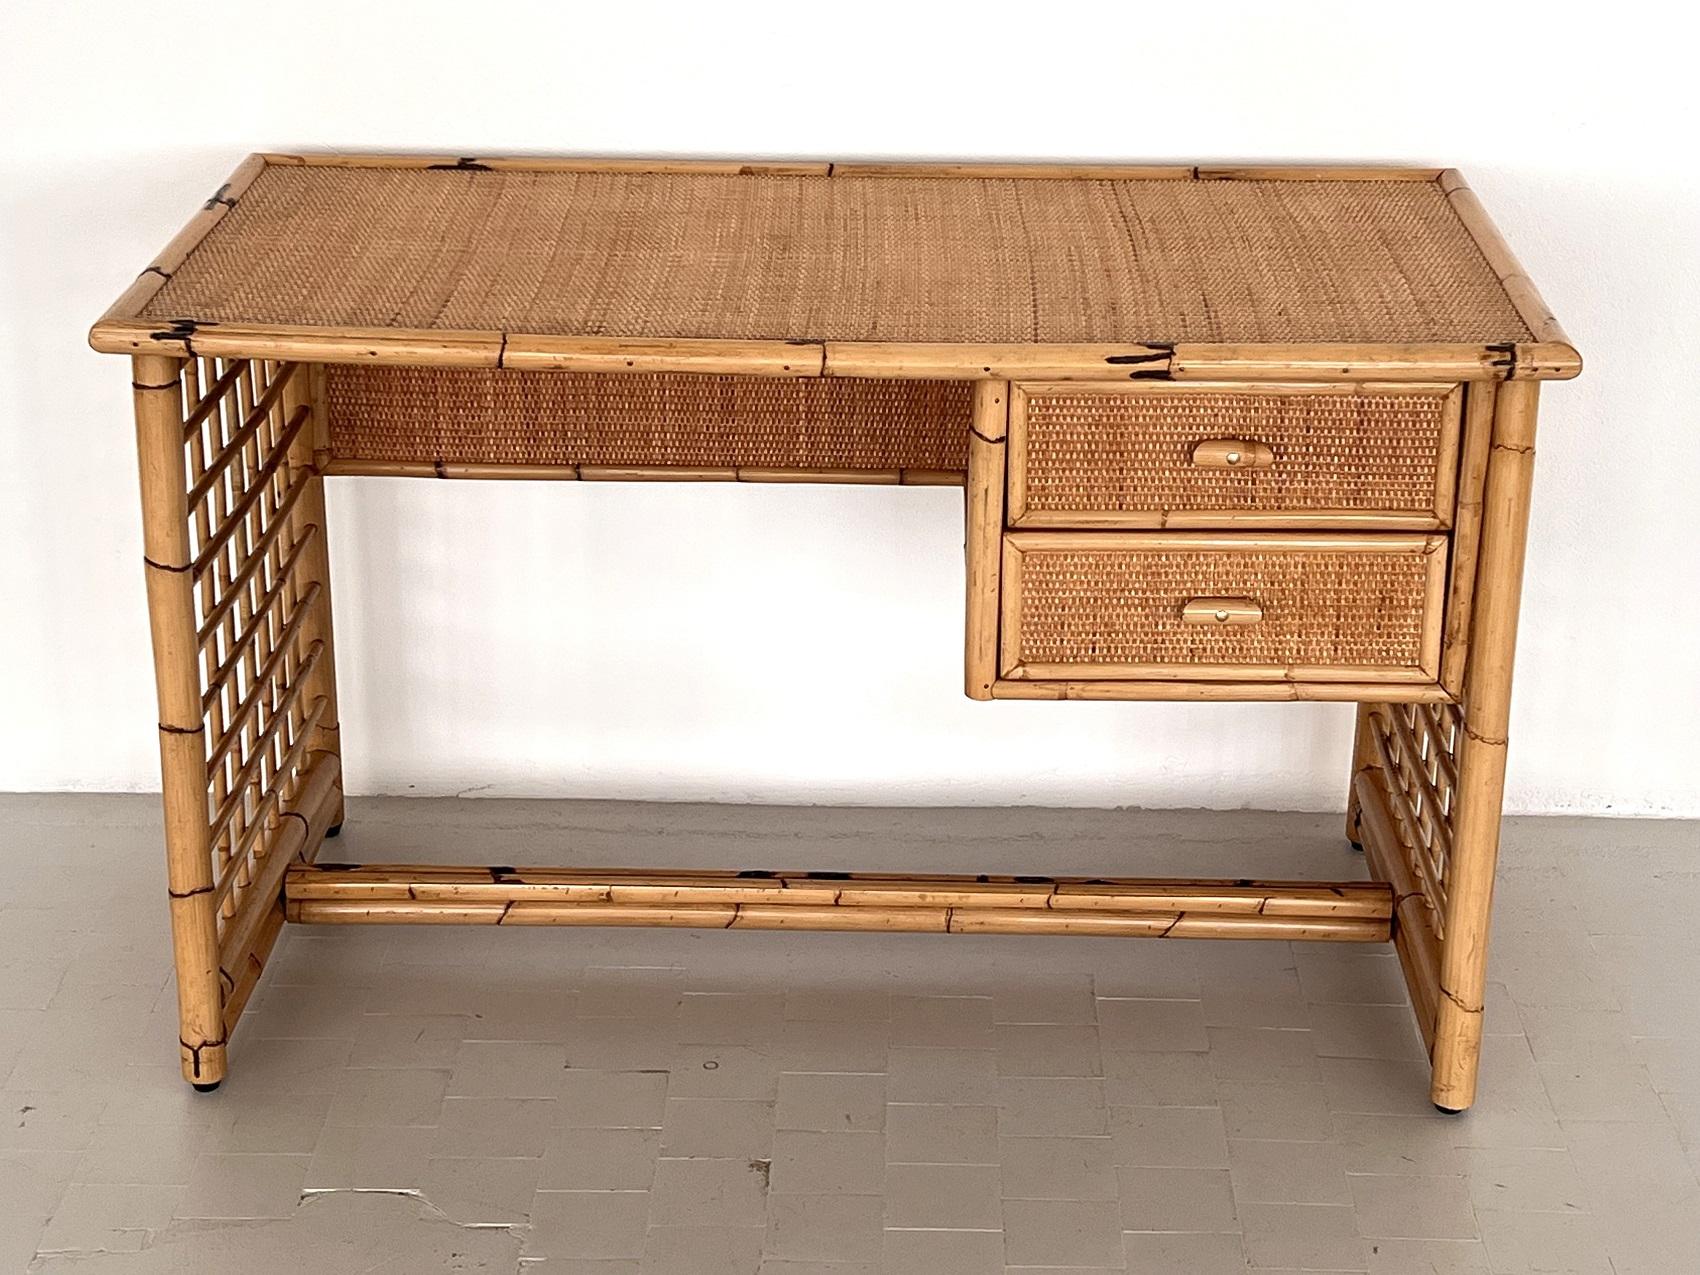 Hand-Crafted Italian Midcentury Bamboo and Rattan Desk or Vanity with two Drawers, 1970s For Sale